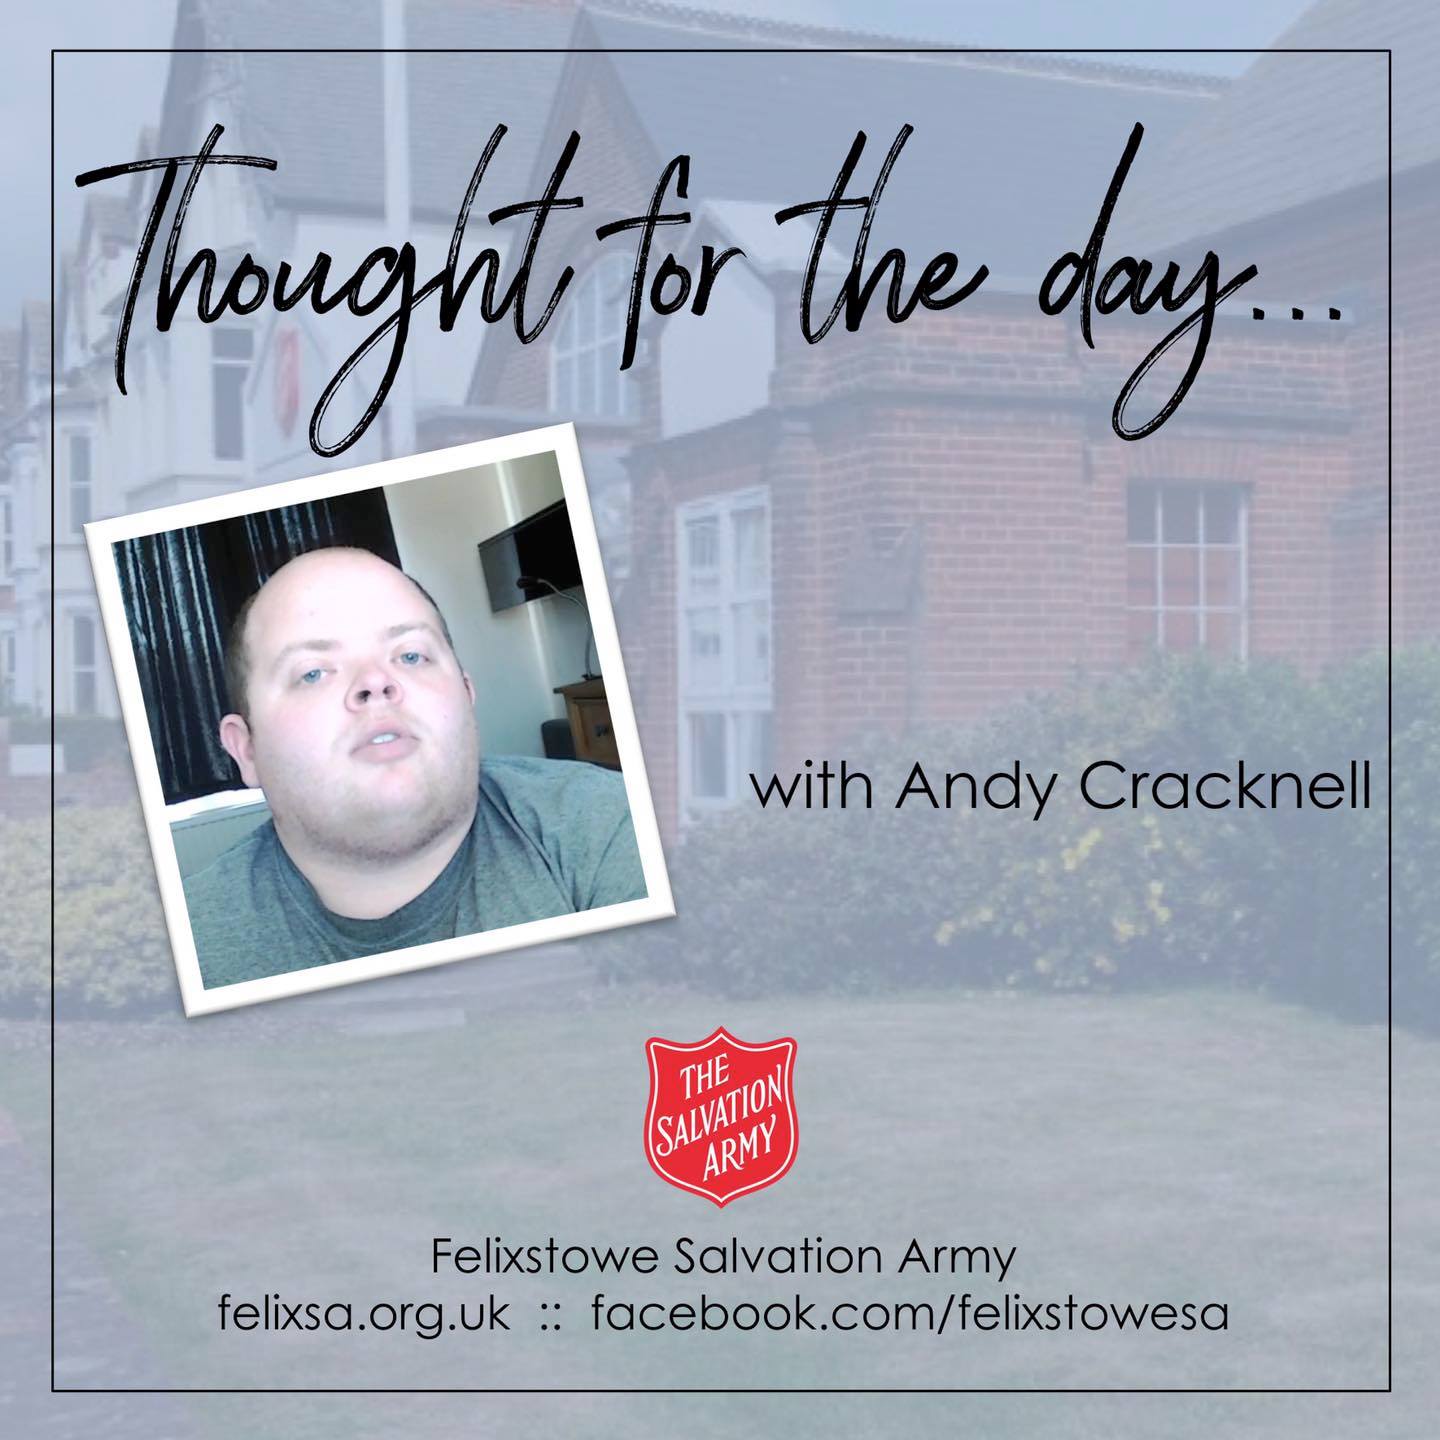 Thought for the Day with Andy Cracknell